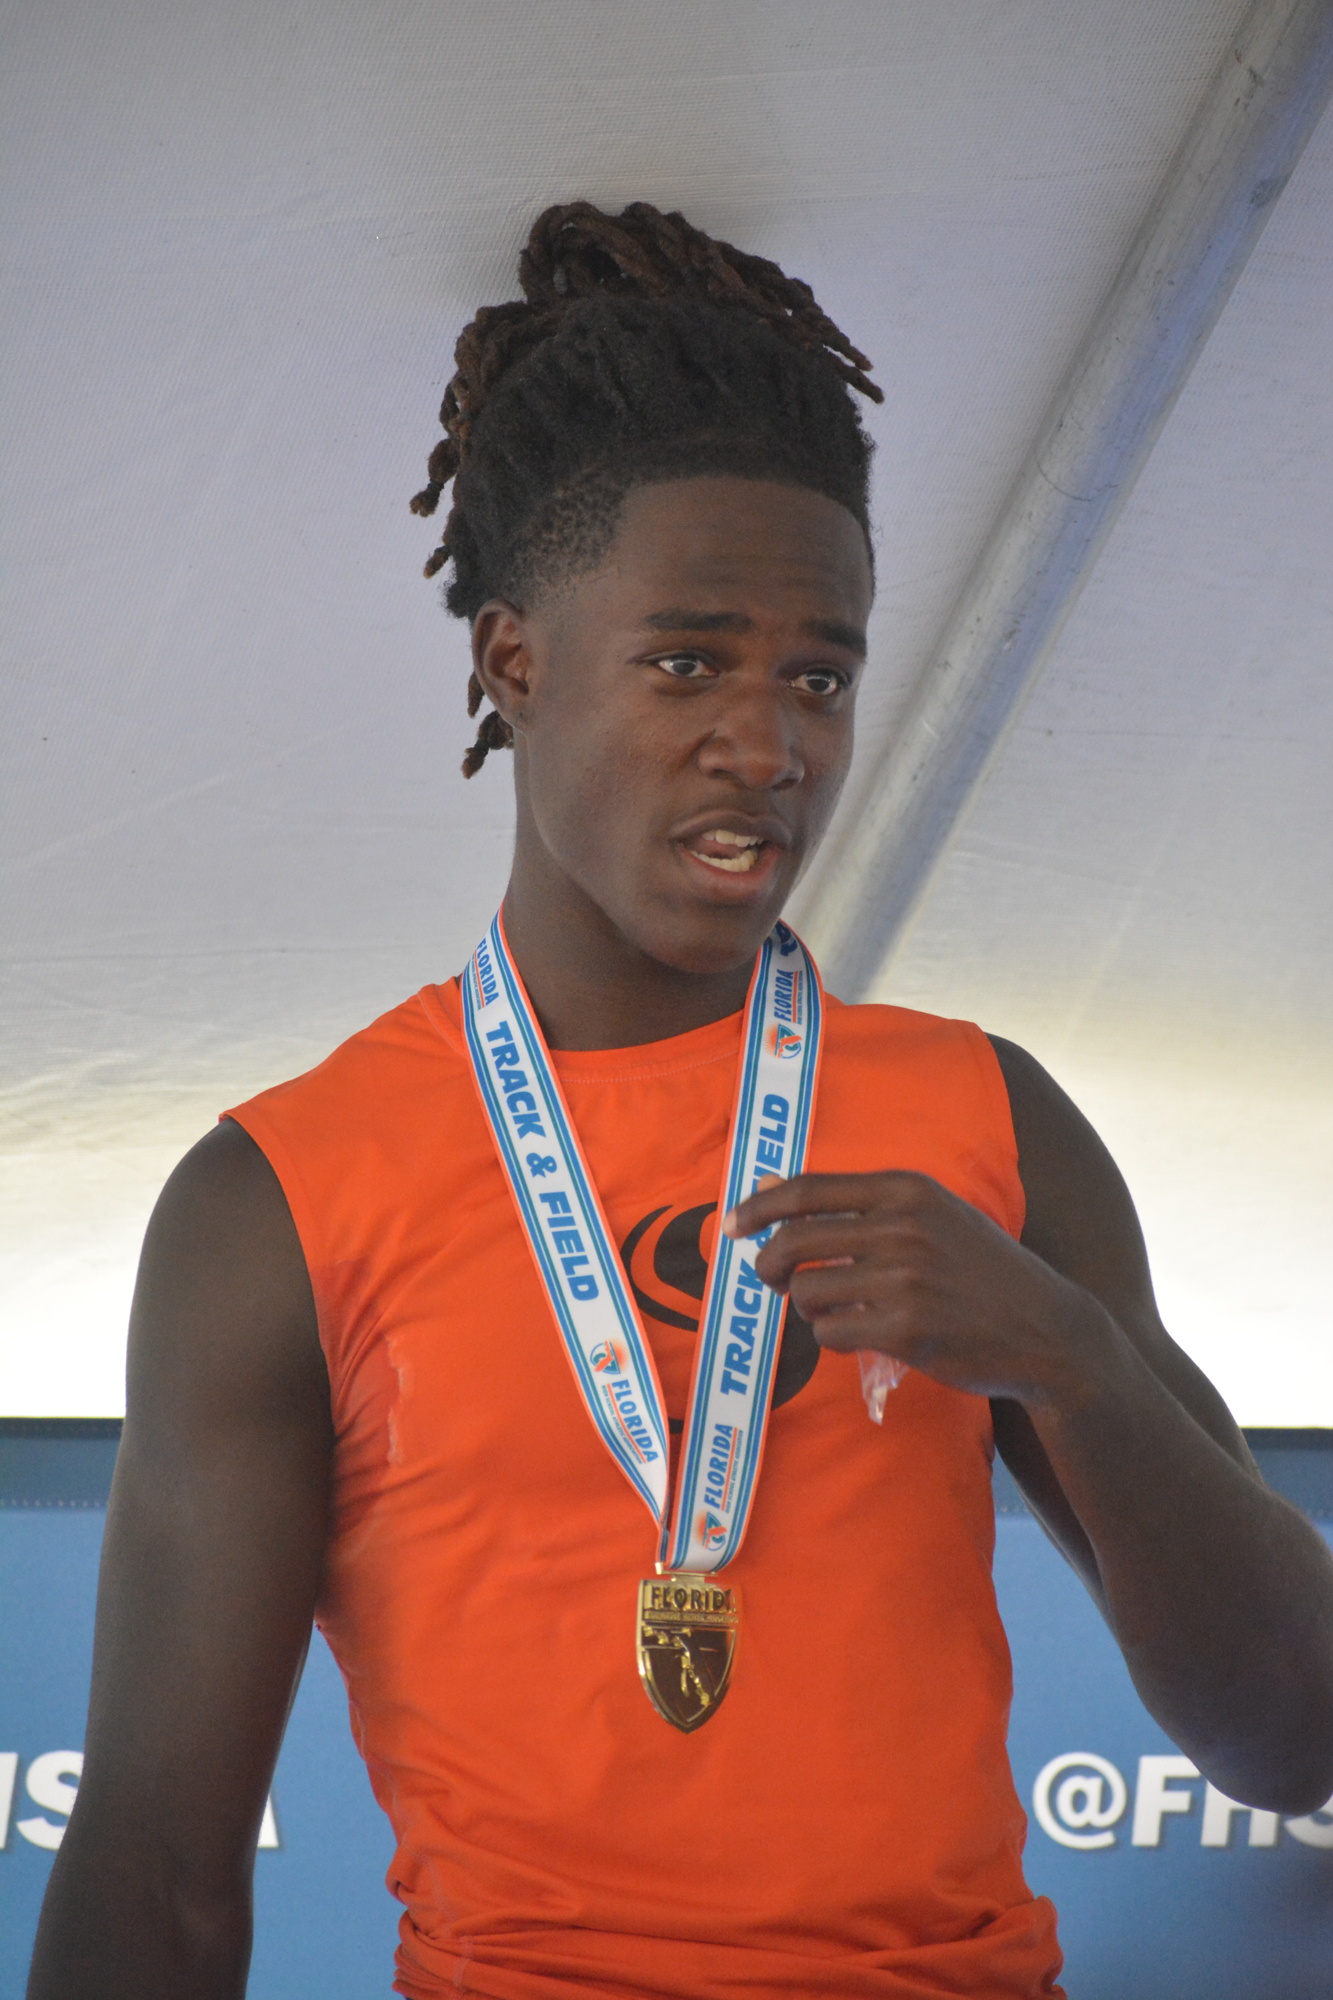 2. Sarasota High senior Robbie Peterson won the triple jump gold medal at the track and field championships.